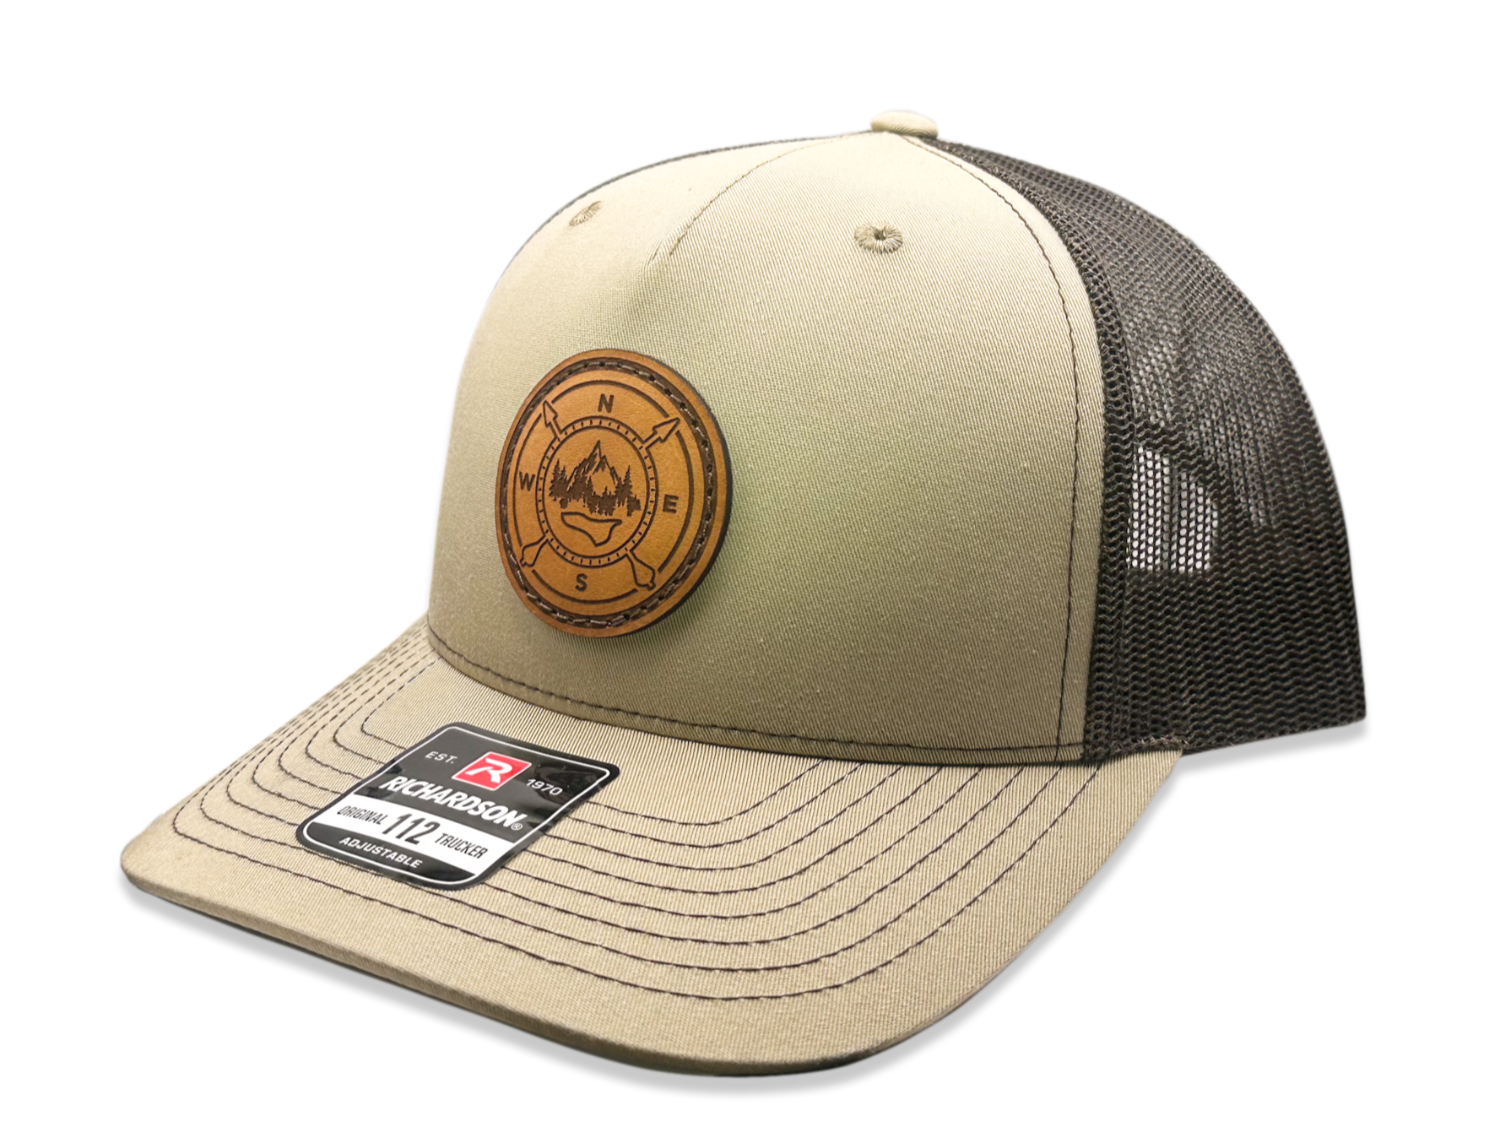 Custom Khaki/Brown Richardson Leather Patch hat. Our custom designed leather patch is laser engraved and sewn onto a Richardson 112 Hat. We use full-grain, veg tanned leather. Our custom leather patches are handmade and designed in Colorado, USA.